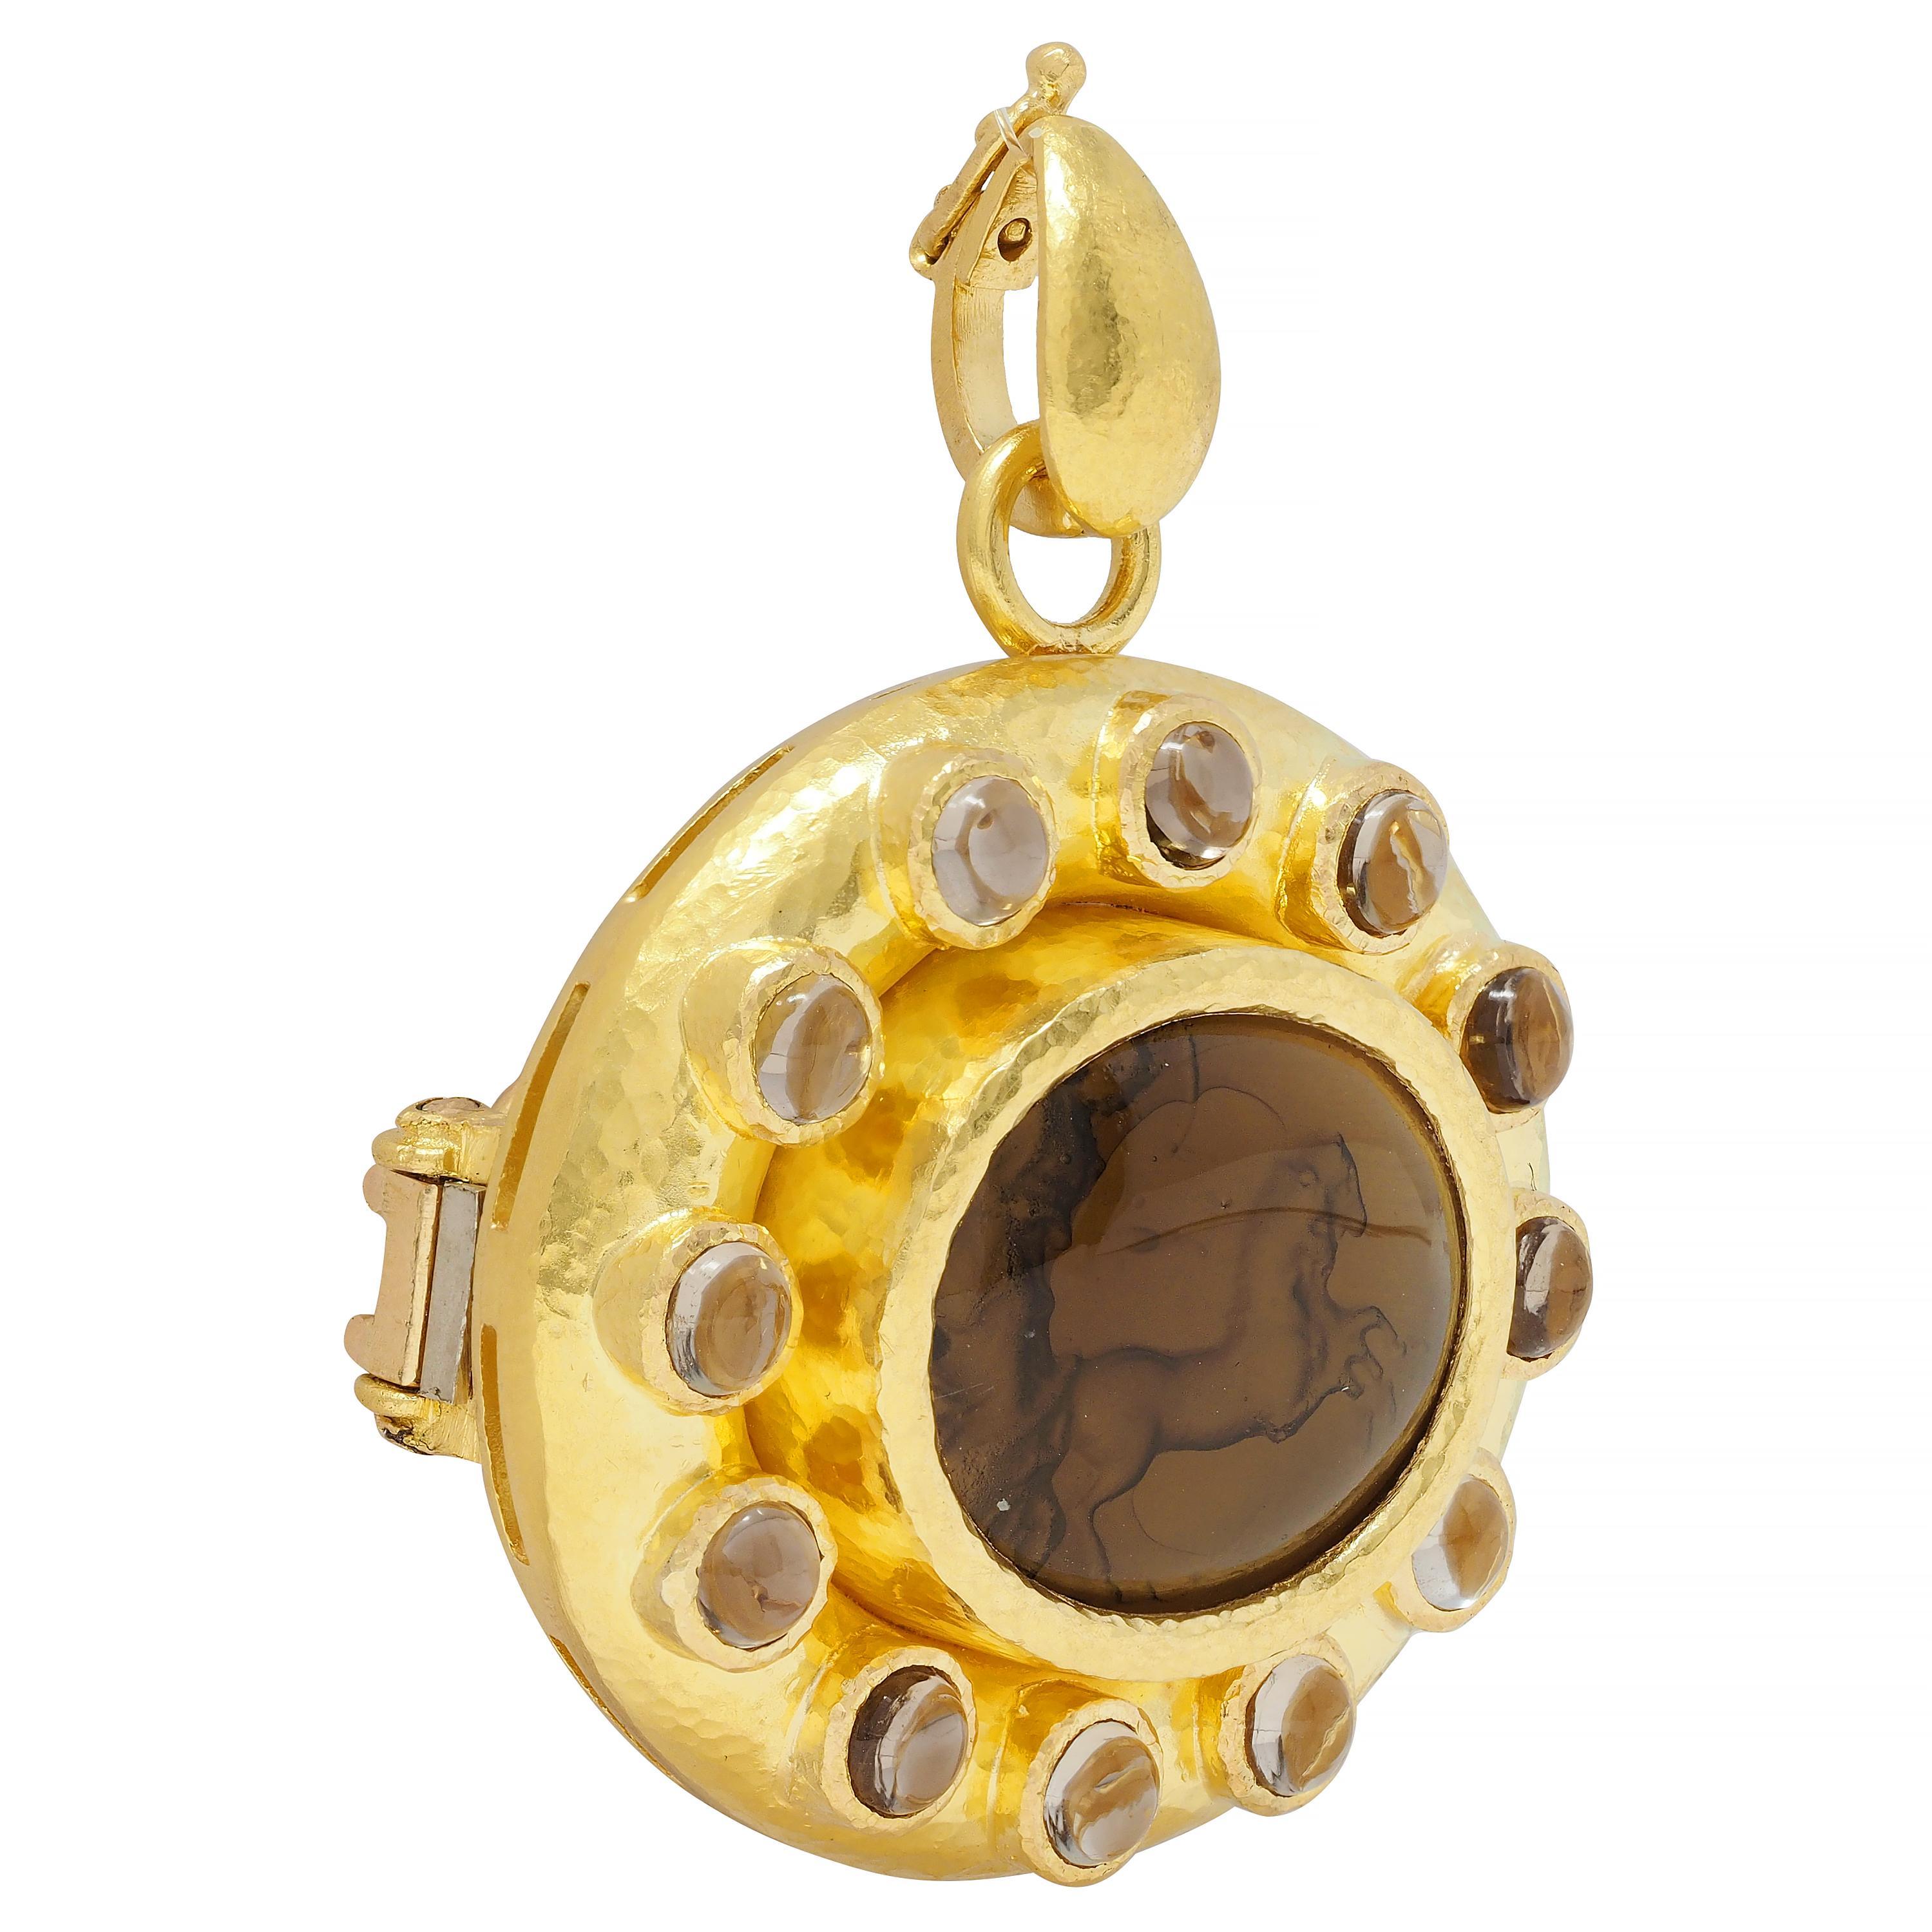 Centering an oval-shaped reverse-carved Venetian glass cabochon measuring 18.5 x 15.5 mm 
Transparent light brown in color - reverse carved with intaglio of a Roman chariot 
With a woman riding in a standing carriage with two horses - bezel set